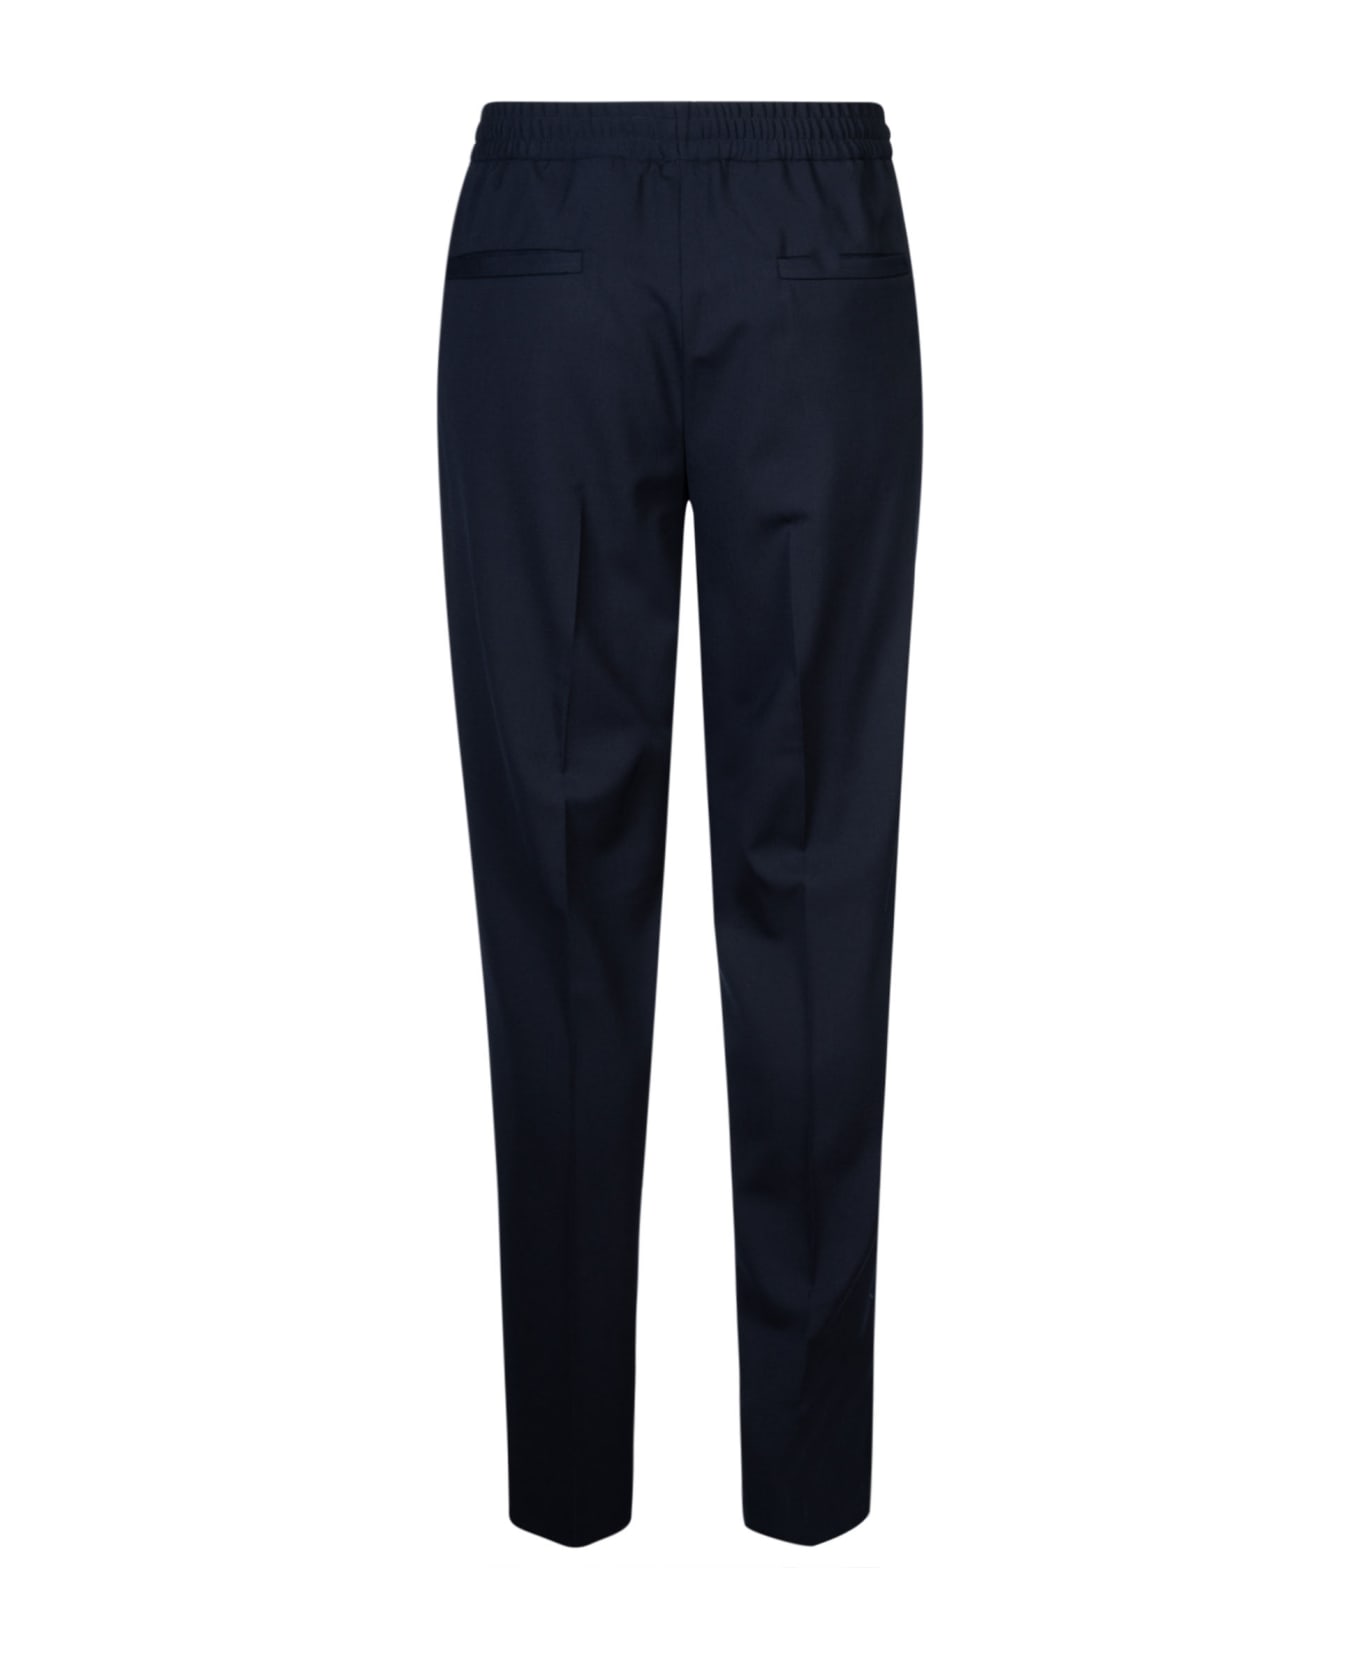 Zegna Ribbed Waist Trousers - C